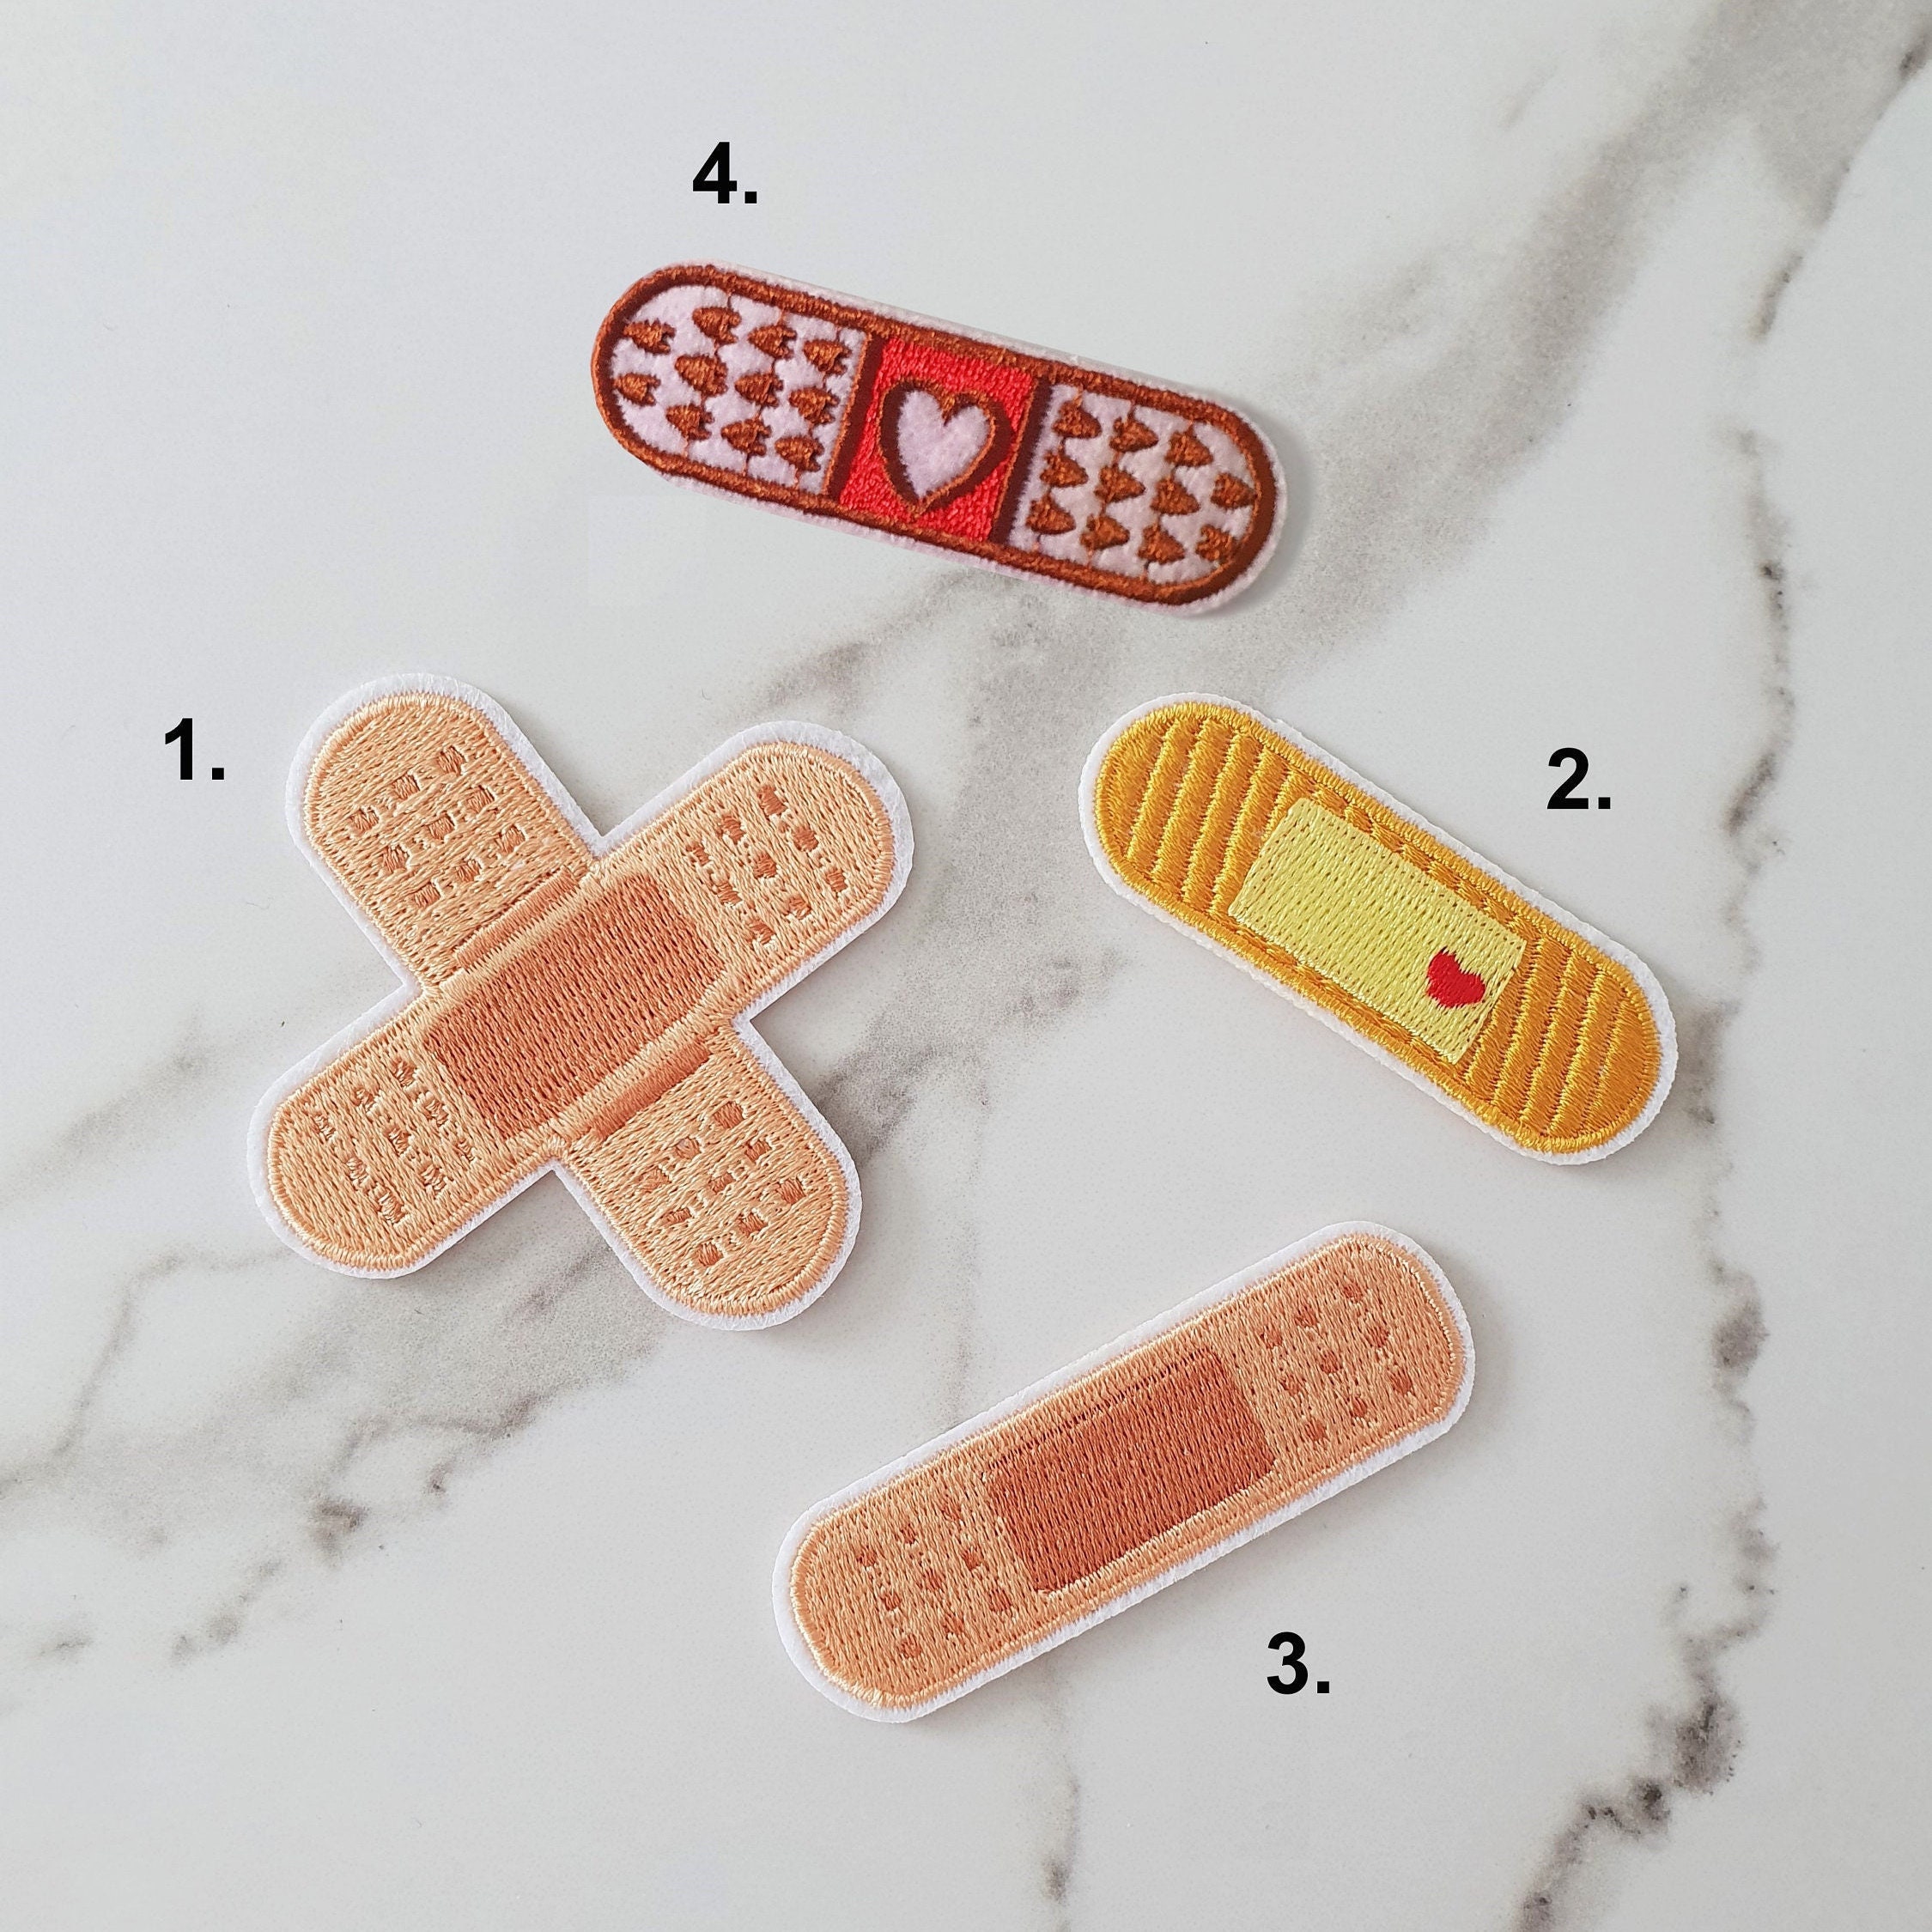 Bandage Case, Band Aid Holder, First Aid Case, Bandage Keychain, Bandage  Key Fob, Bandage Container 